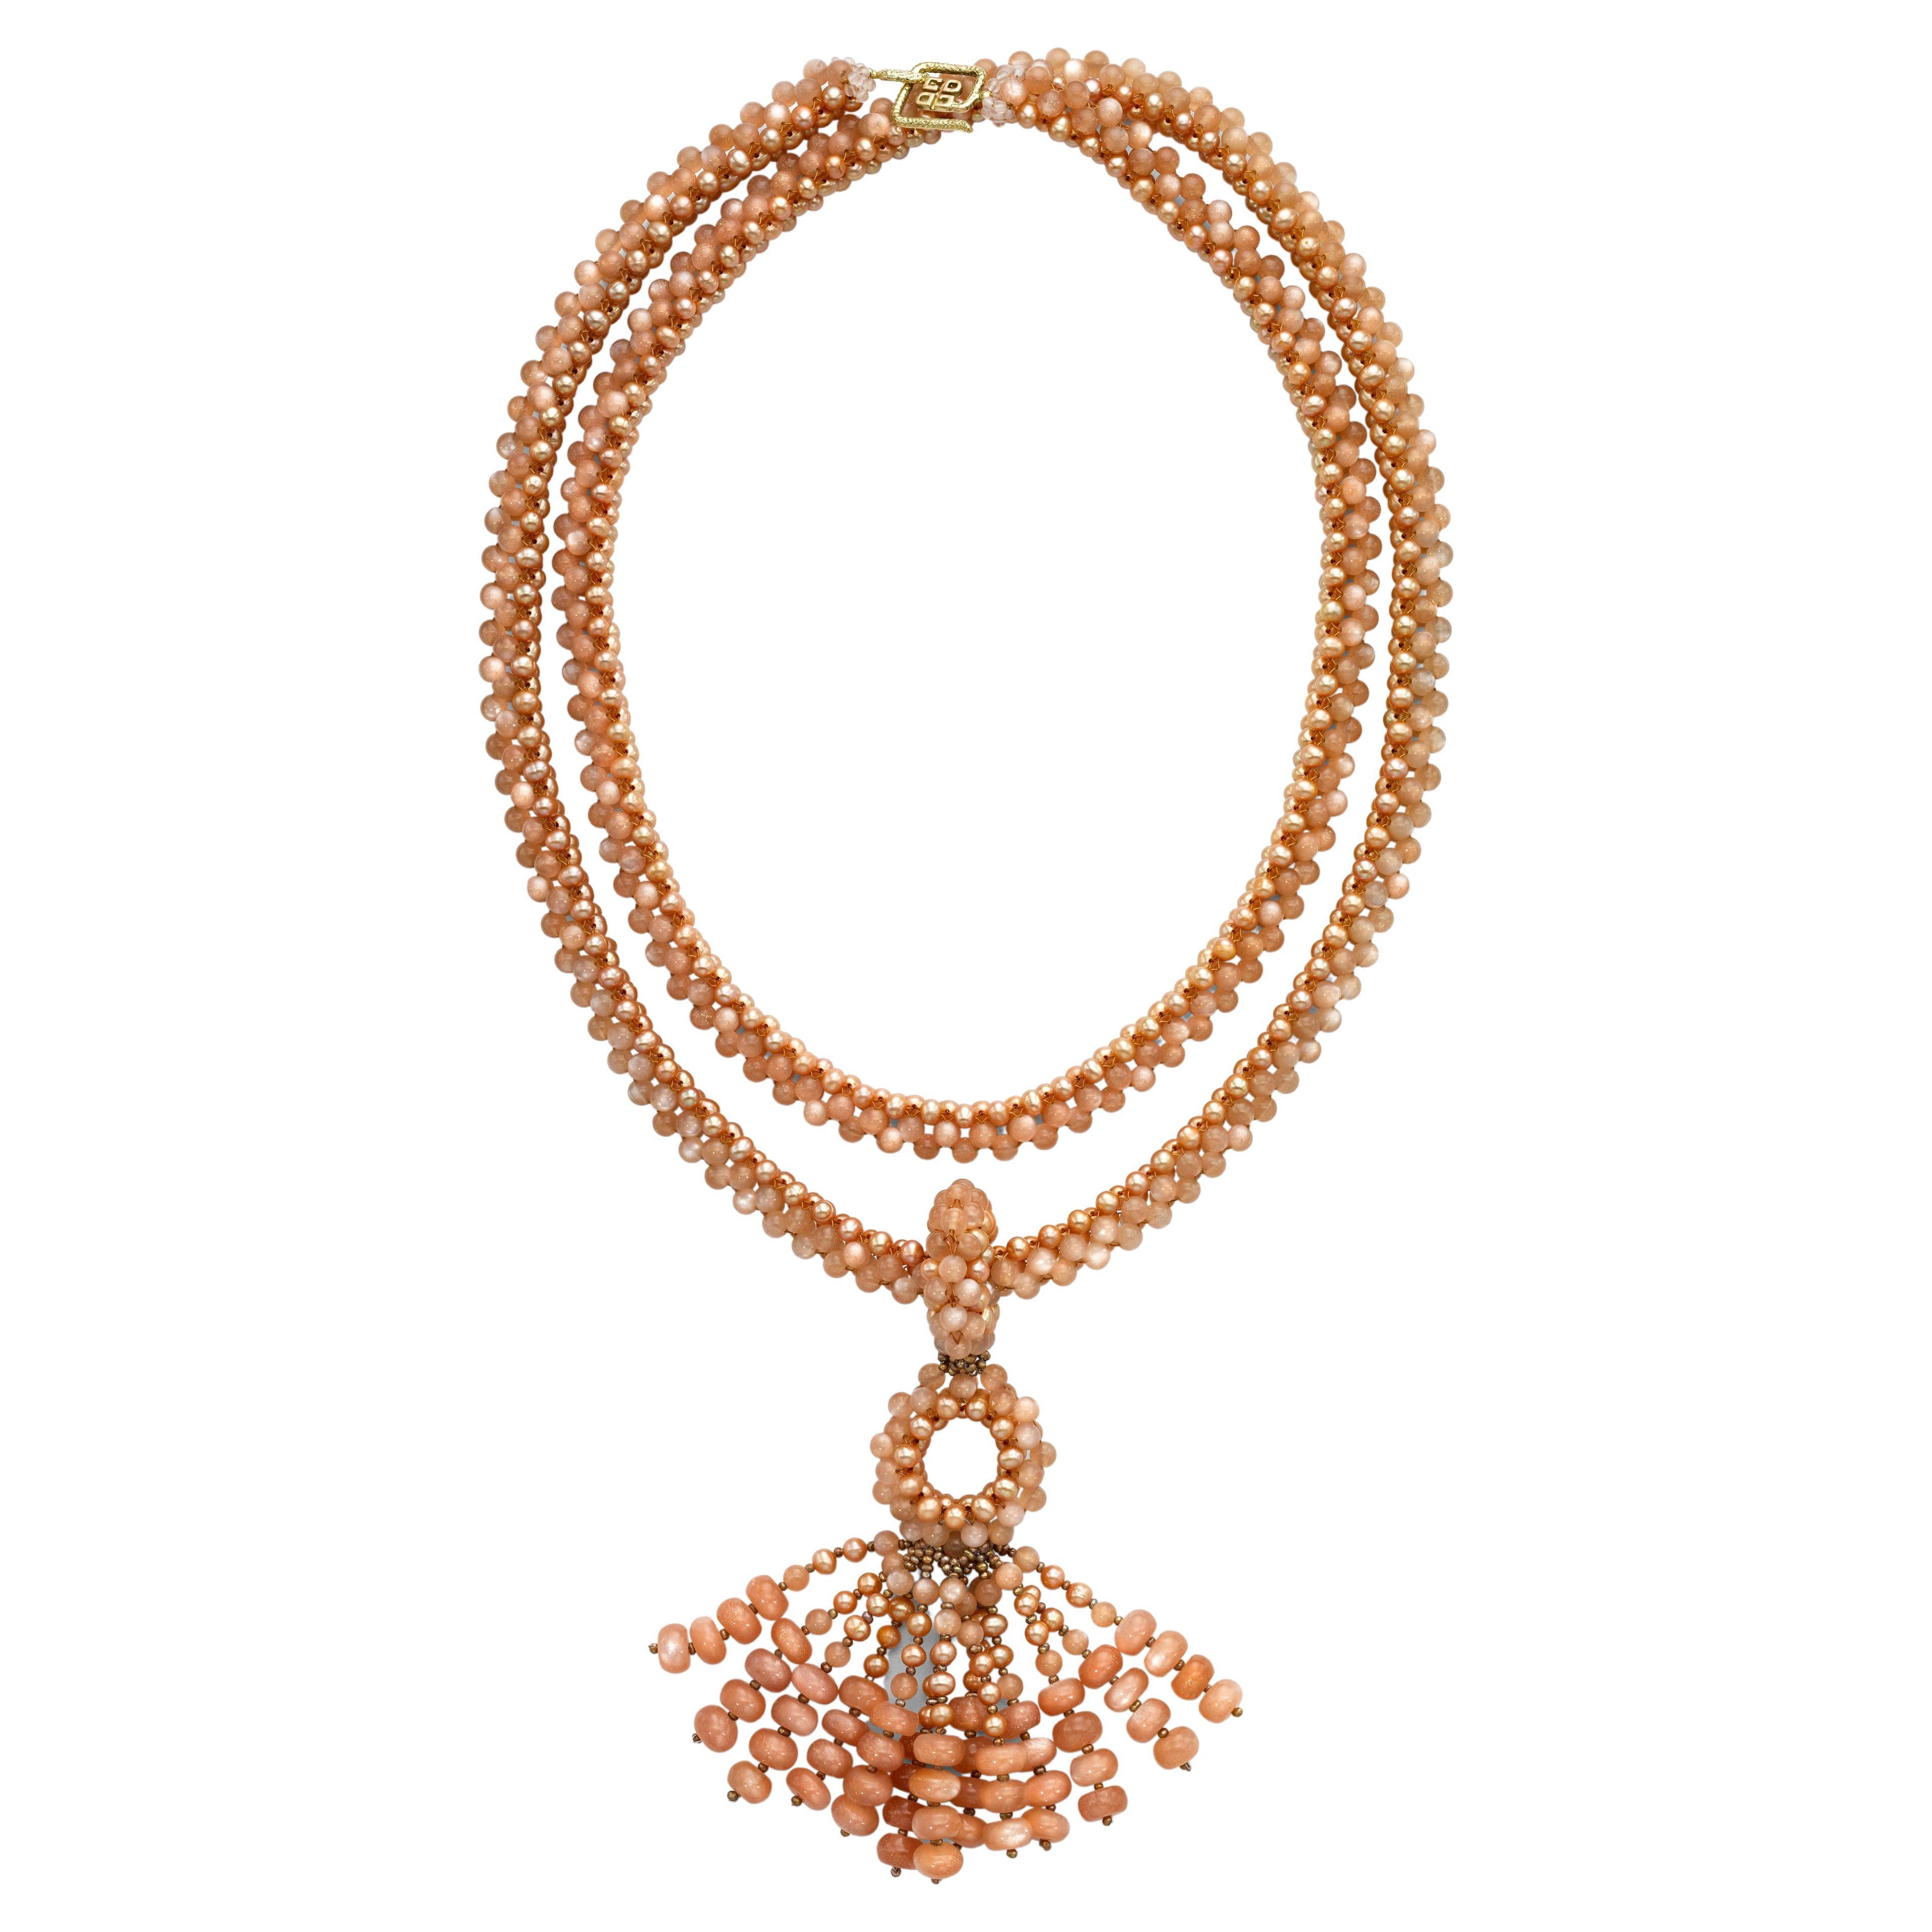 Long Beaded Rope Tassel Necklace in 18k Gold, Pink Pearls, and Peach Moonstone For Sale